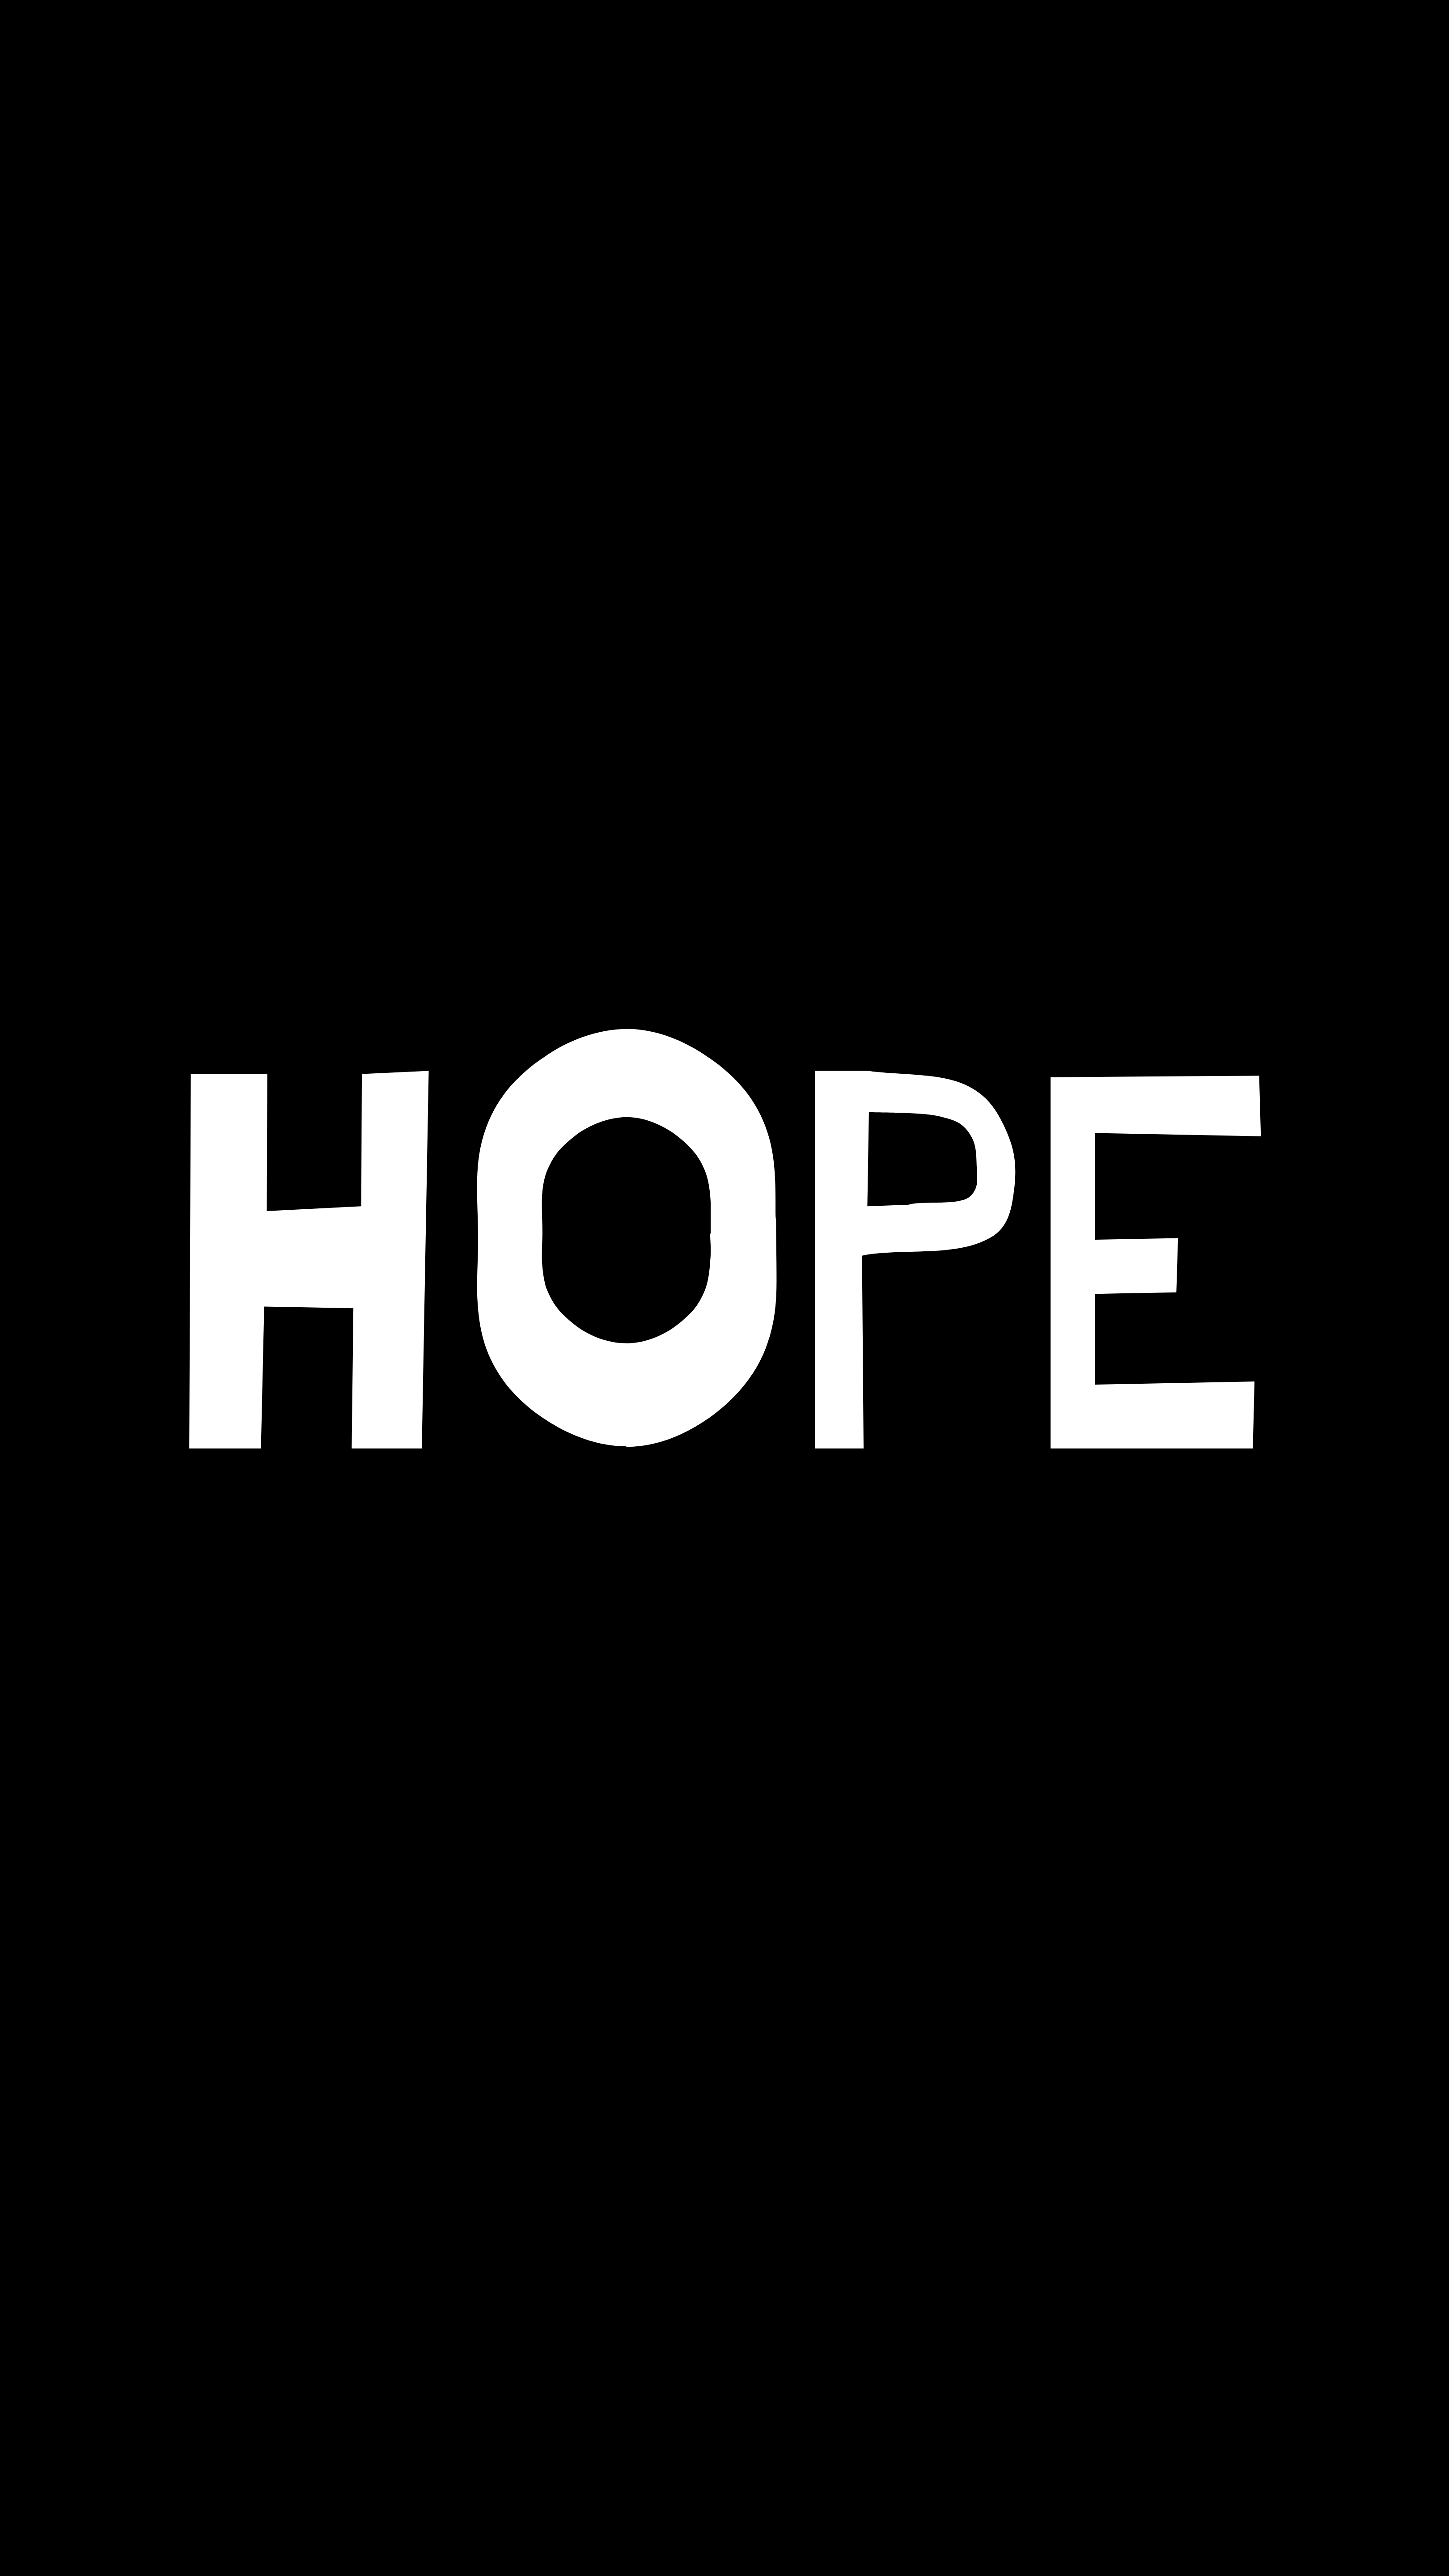 hope, word, text, words, minimalism, inscription Aesthetic wallpaper